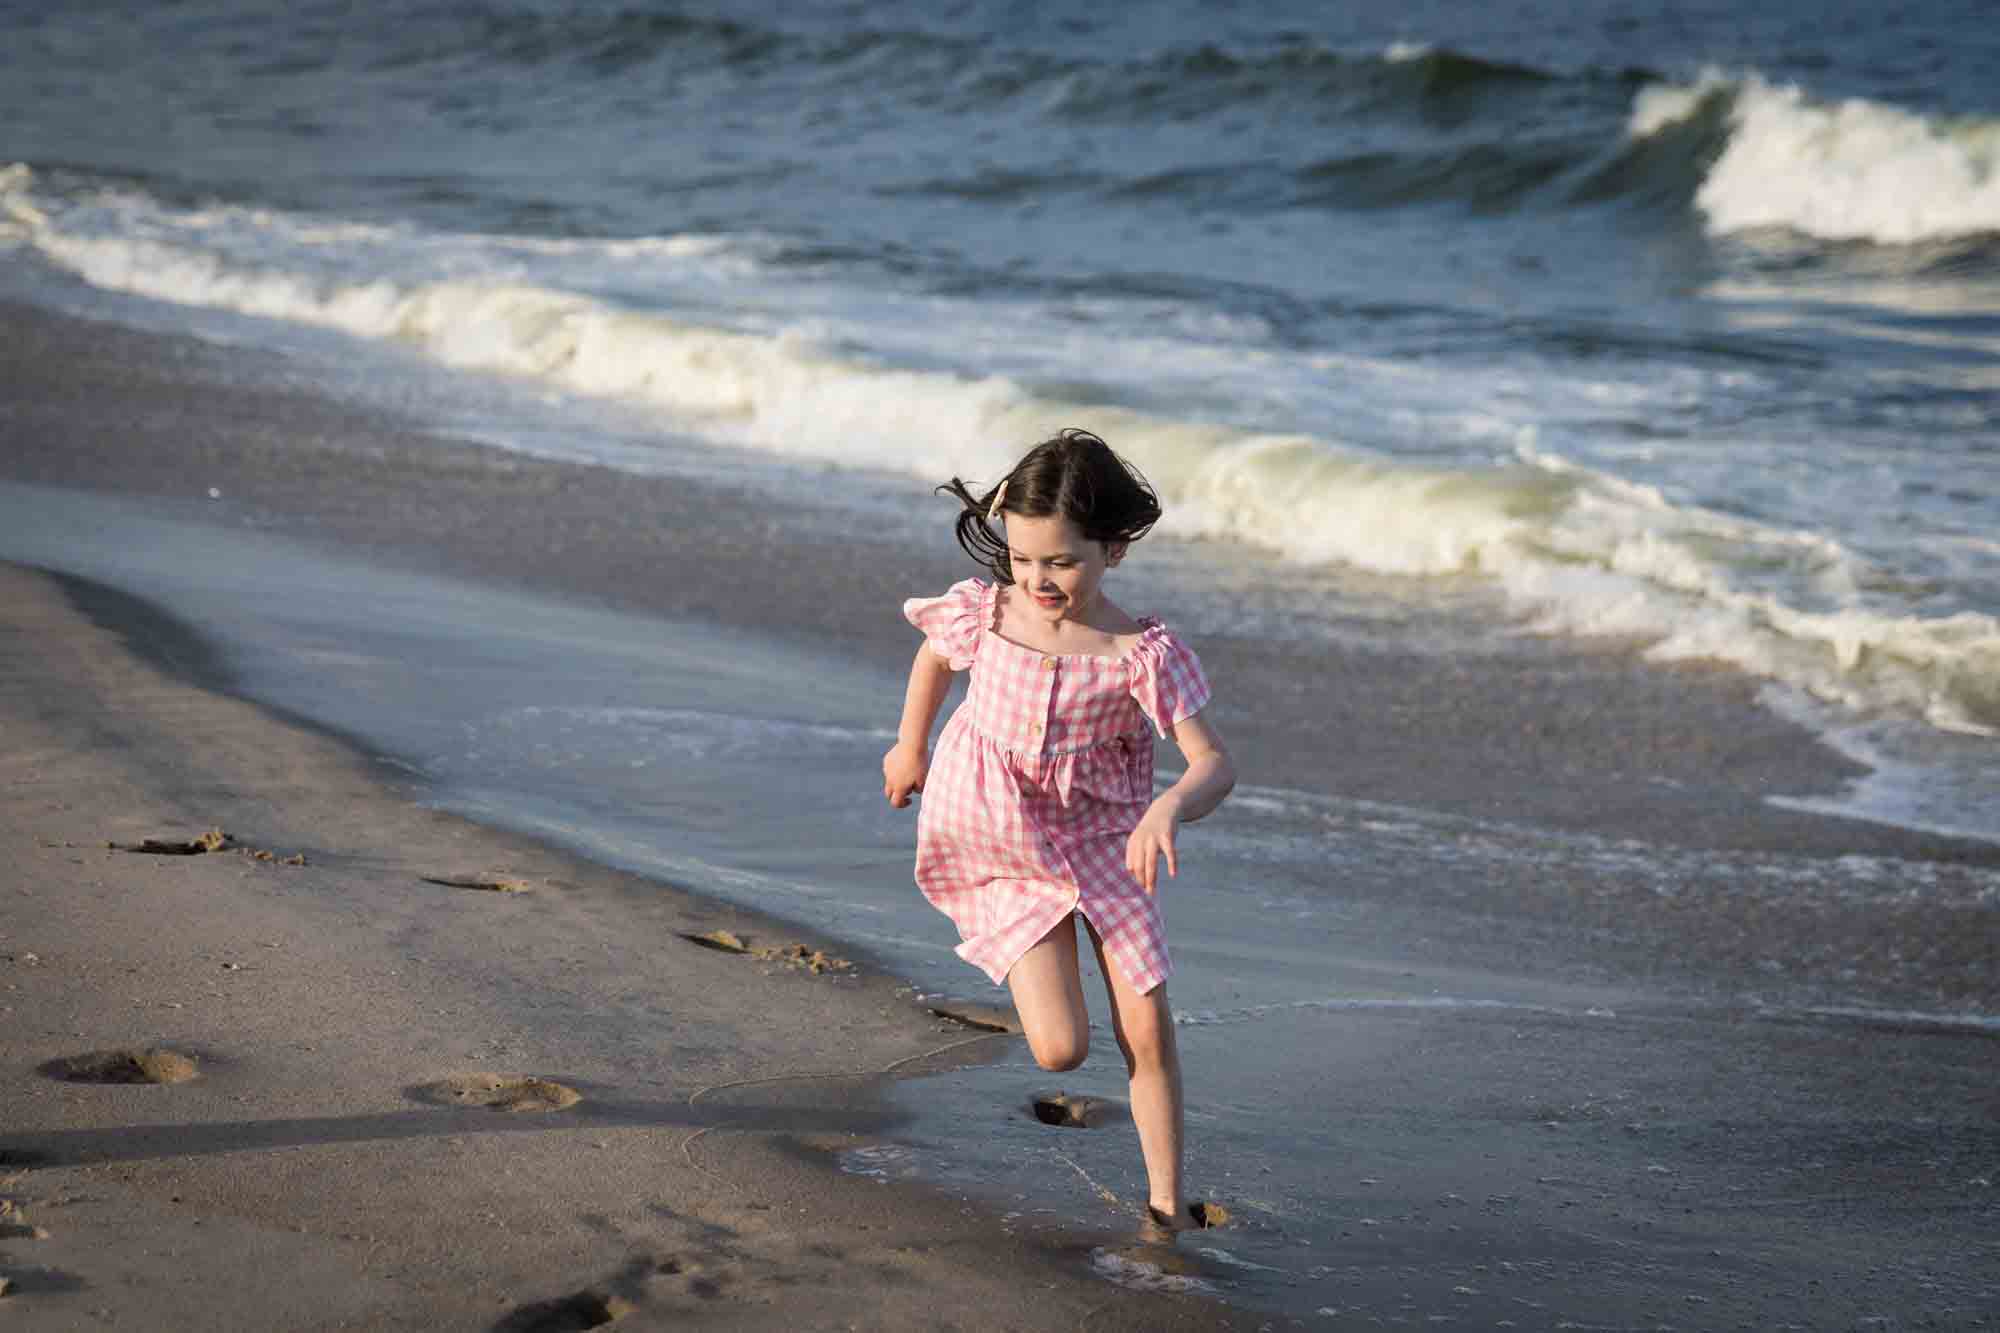 Little girl playing on the beach in front of ocean for an article on how to get the best beach photos